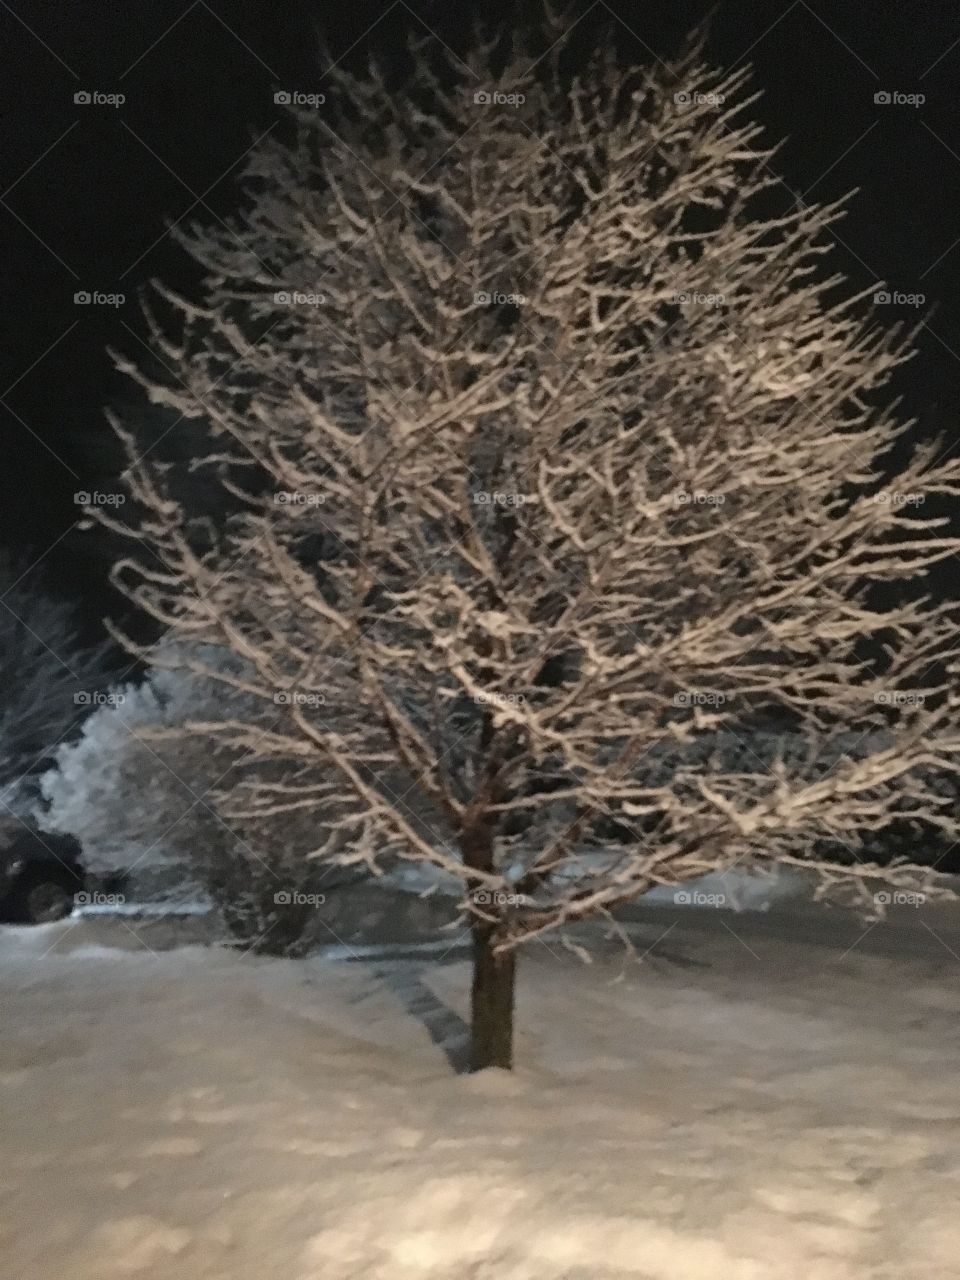 A tree covered in snow at night.